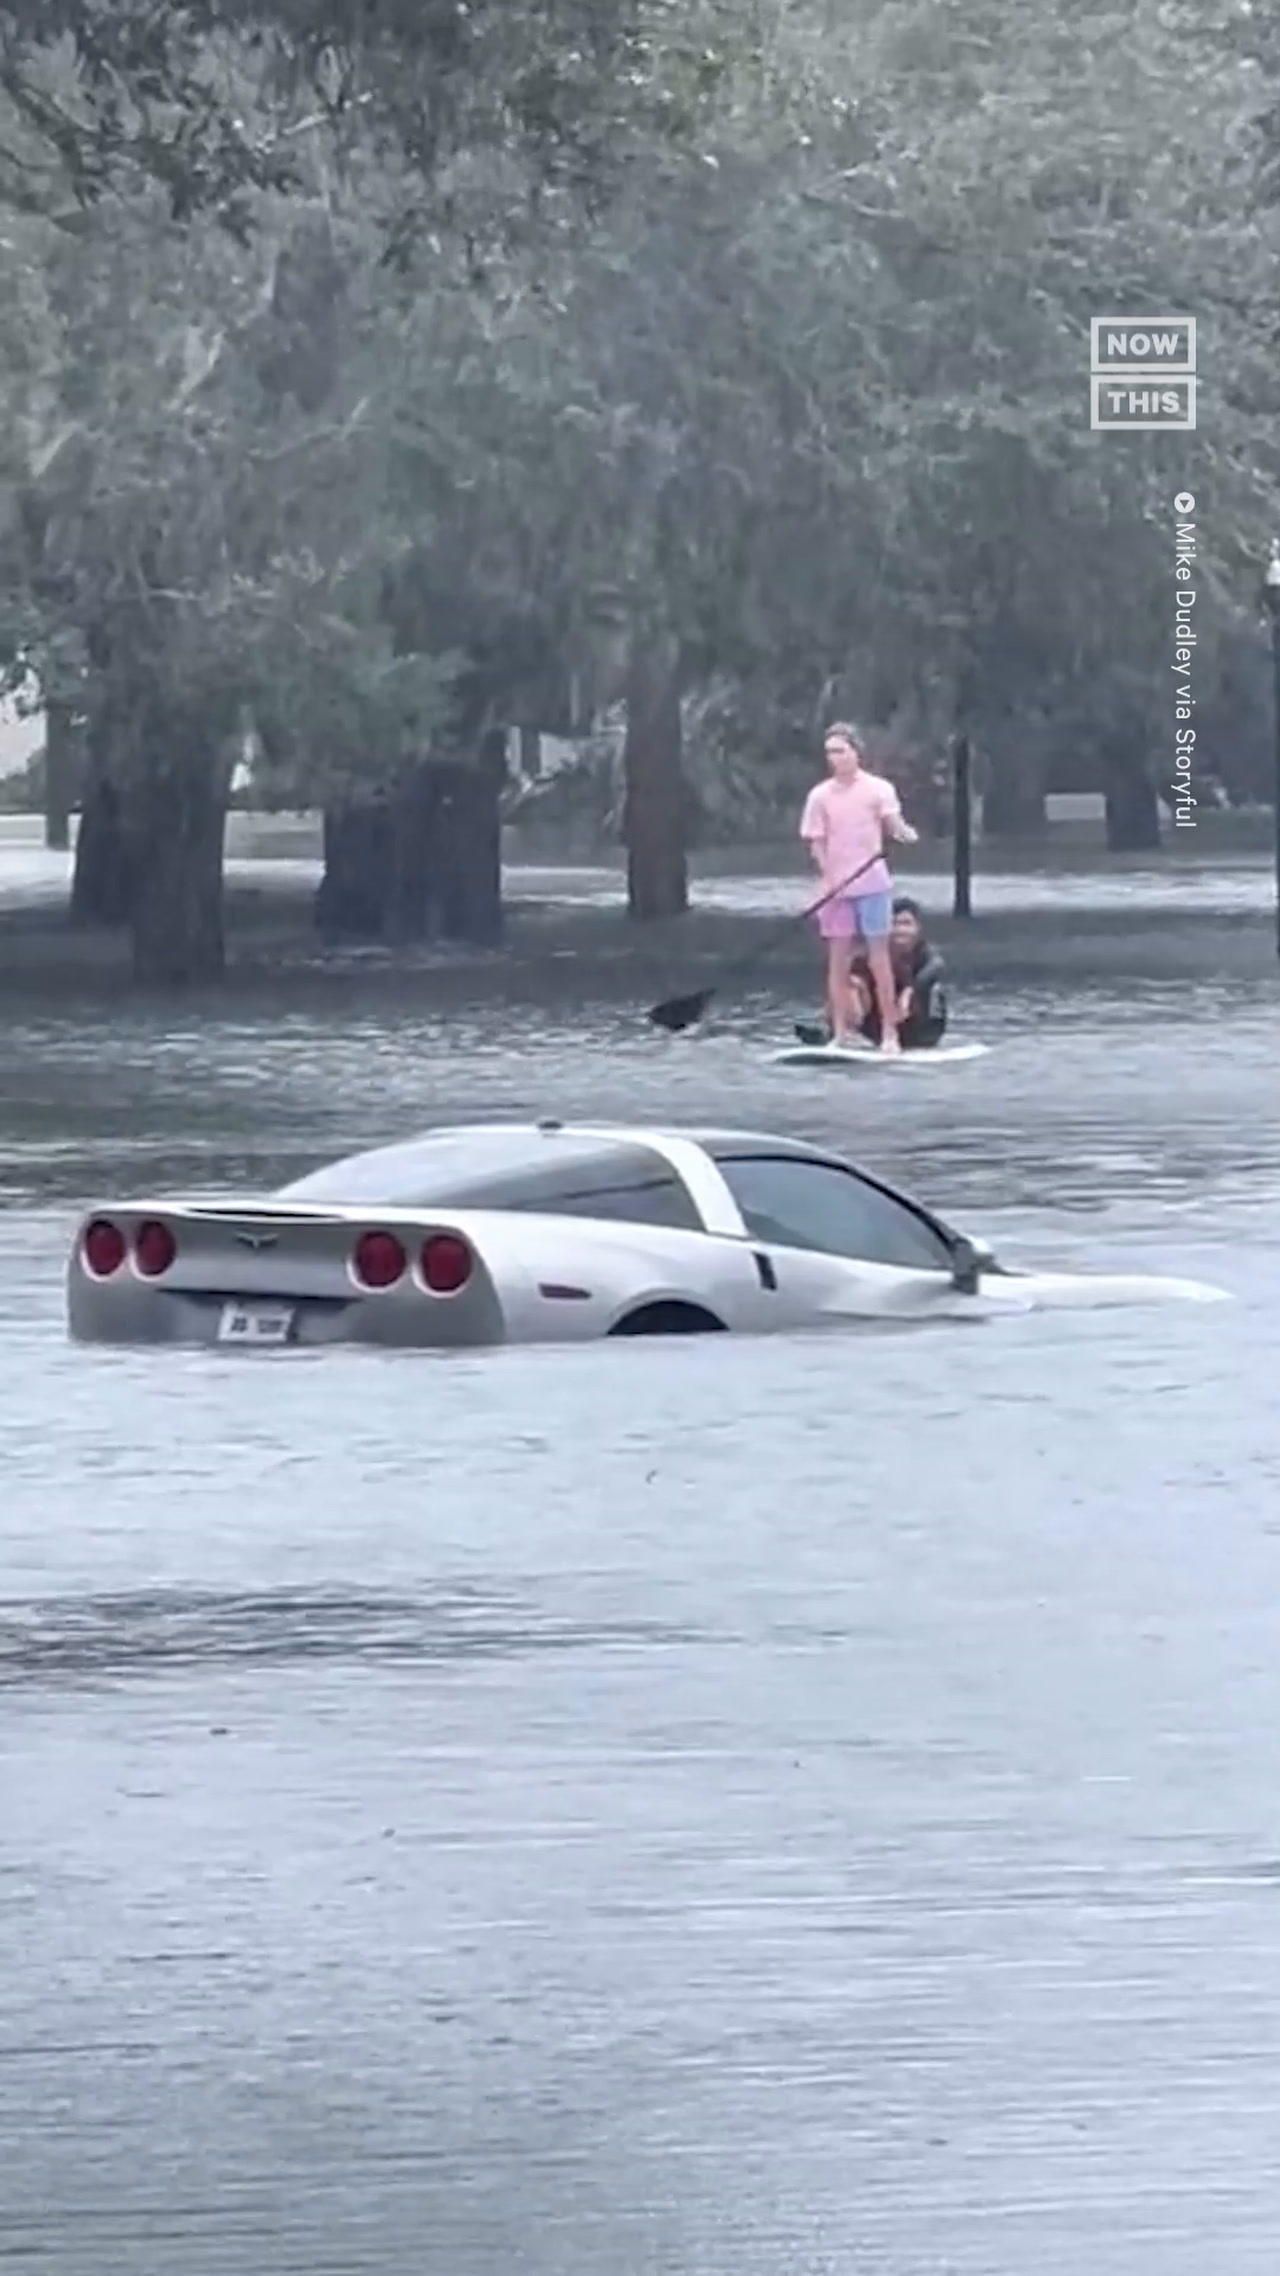 Floridians Paddle Board Through Flooded Streets, Despite Warning